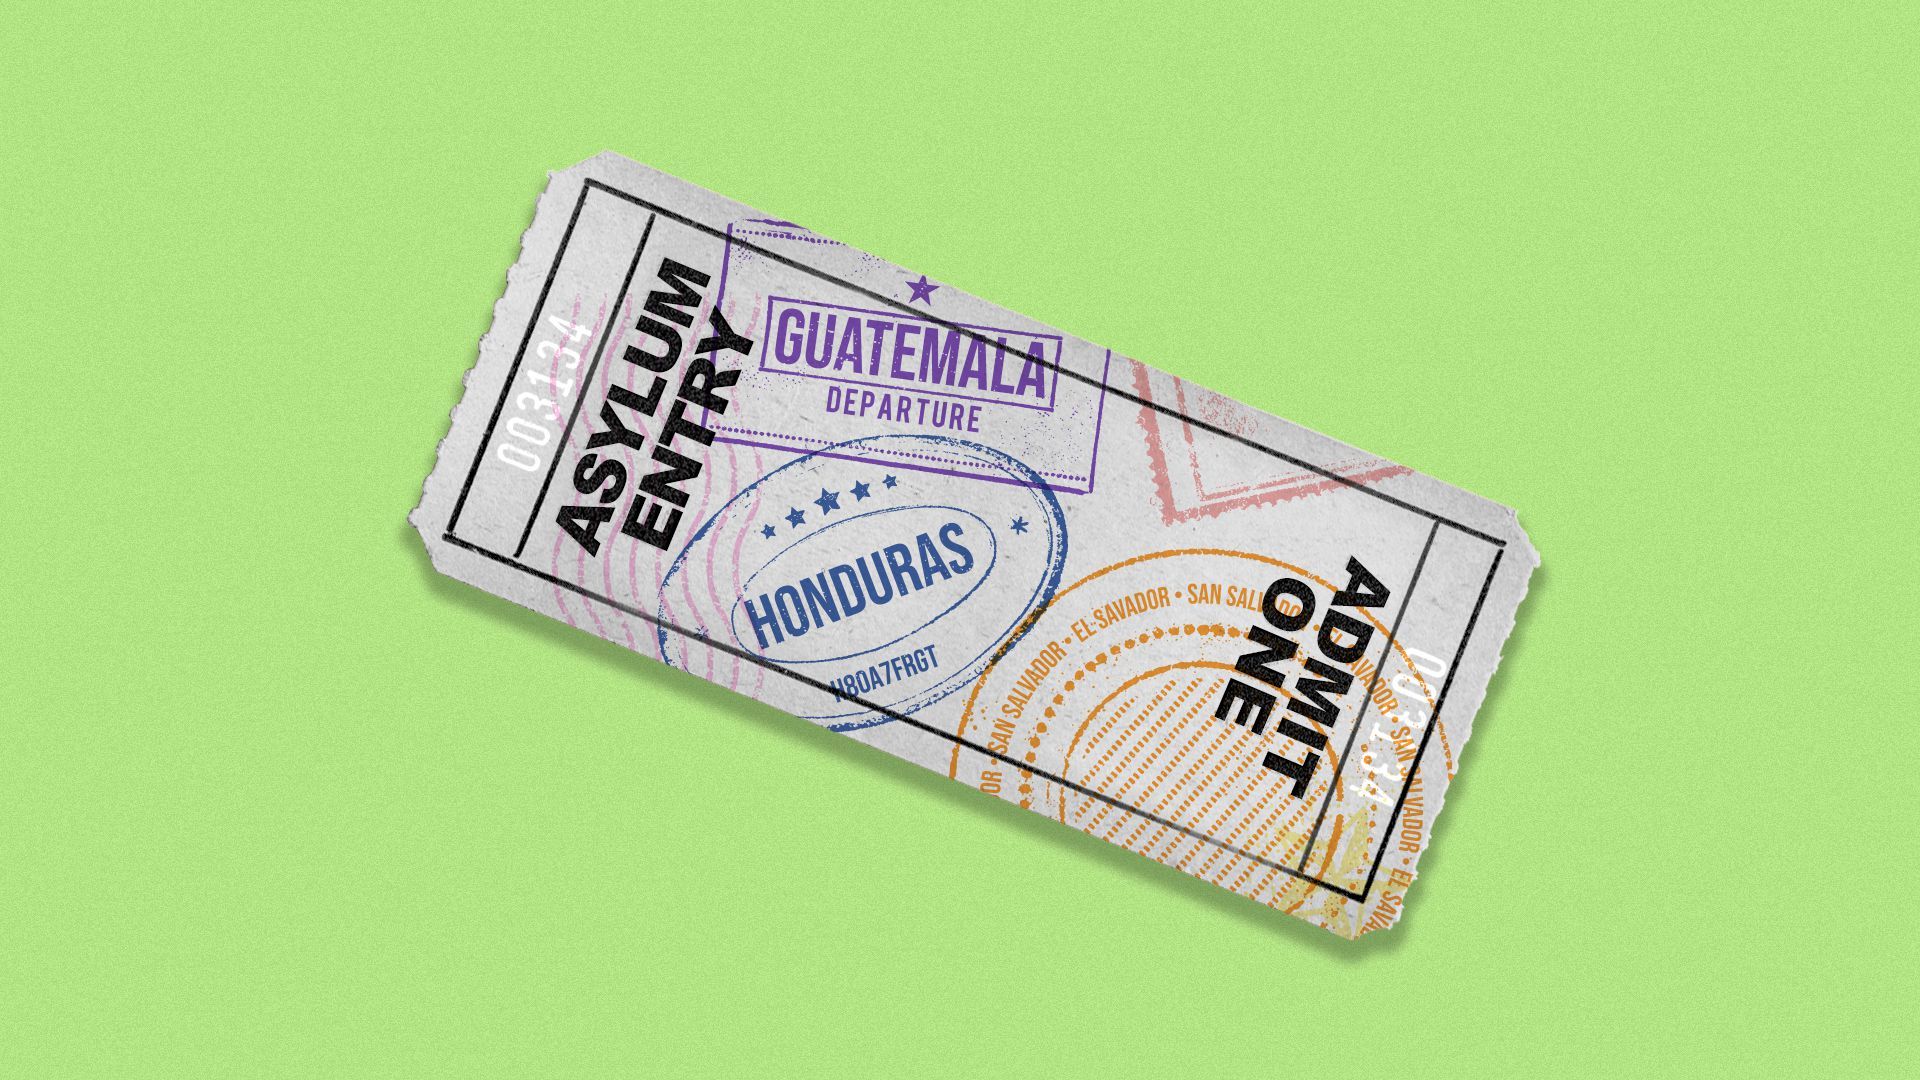 This is a metaphorical ticket for asylum, which immigrants in the migrant caravan are seeking